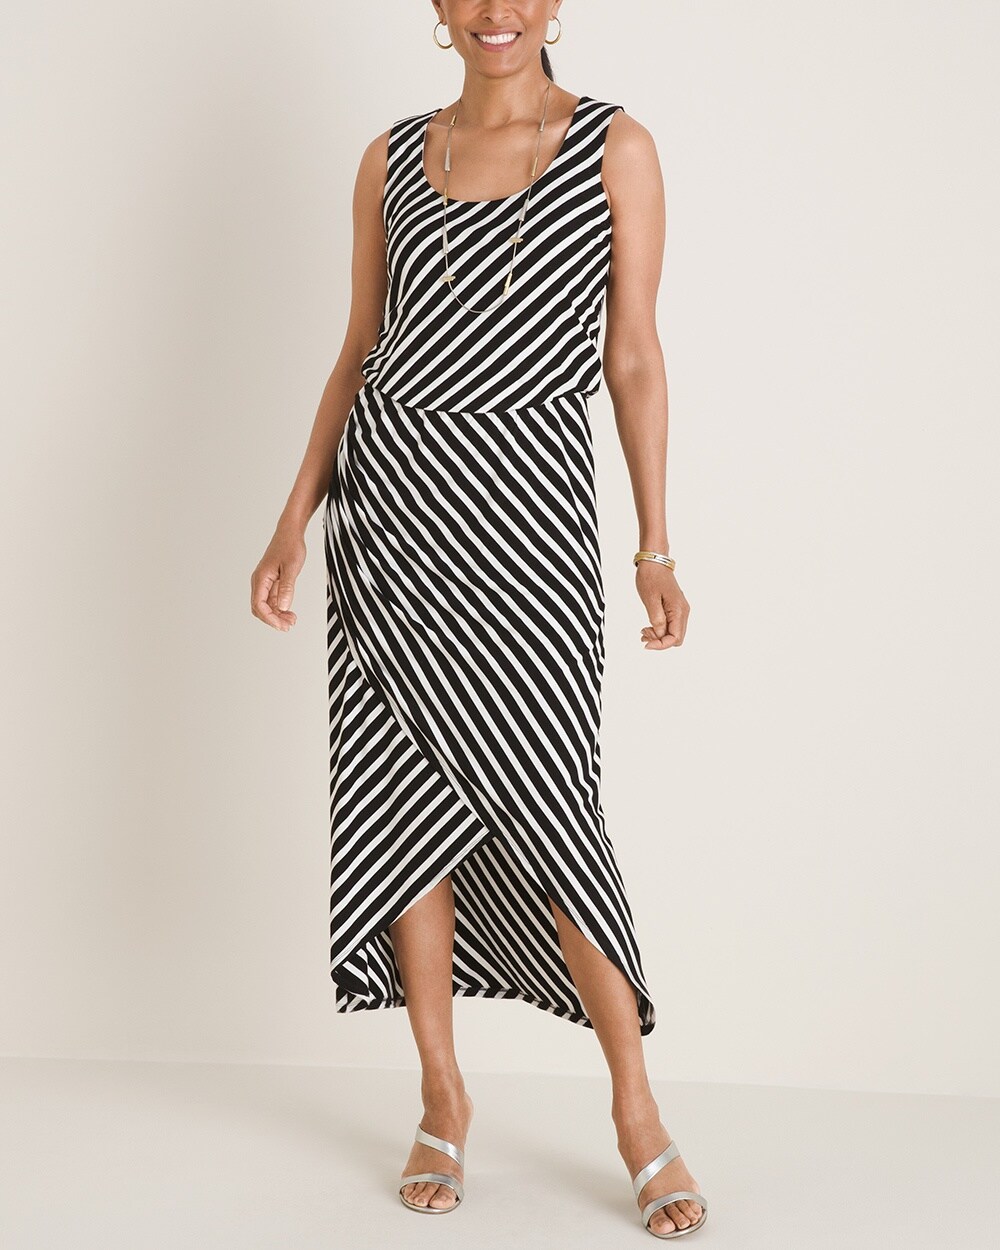 Striped Scoop-neck Maxi Dress video preview image, click to start video